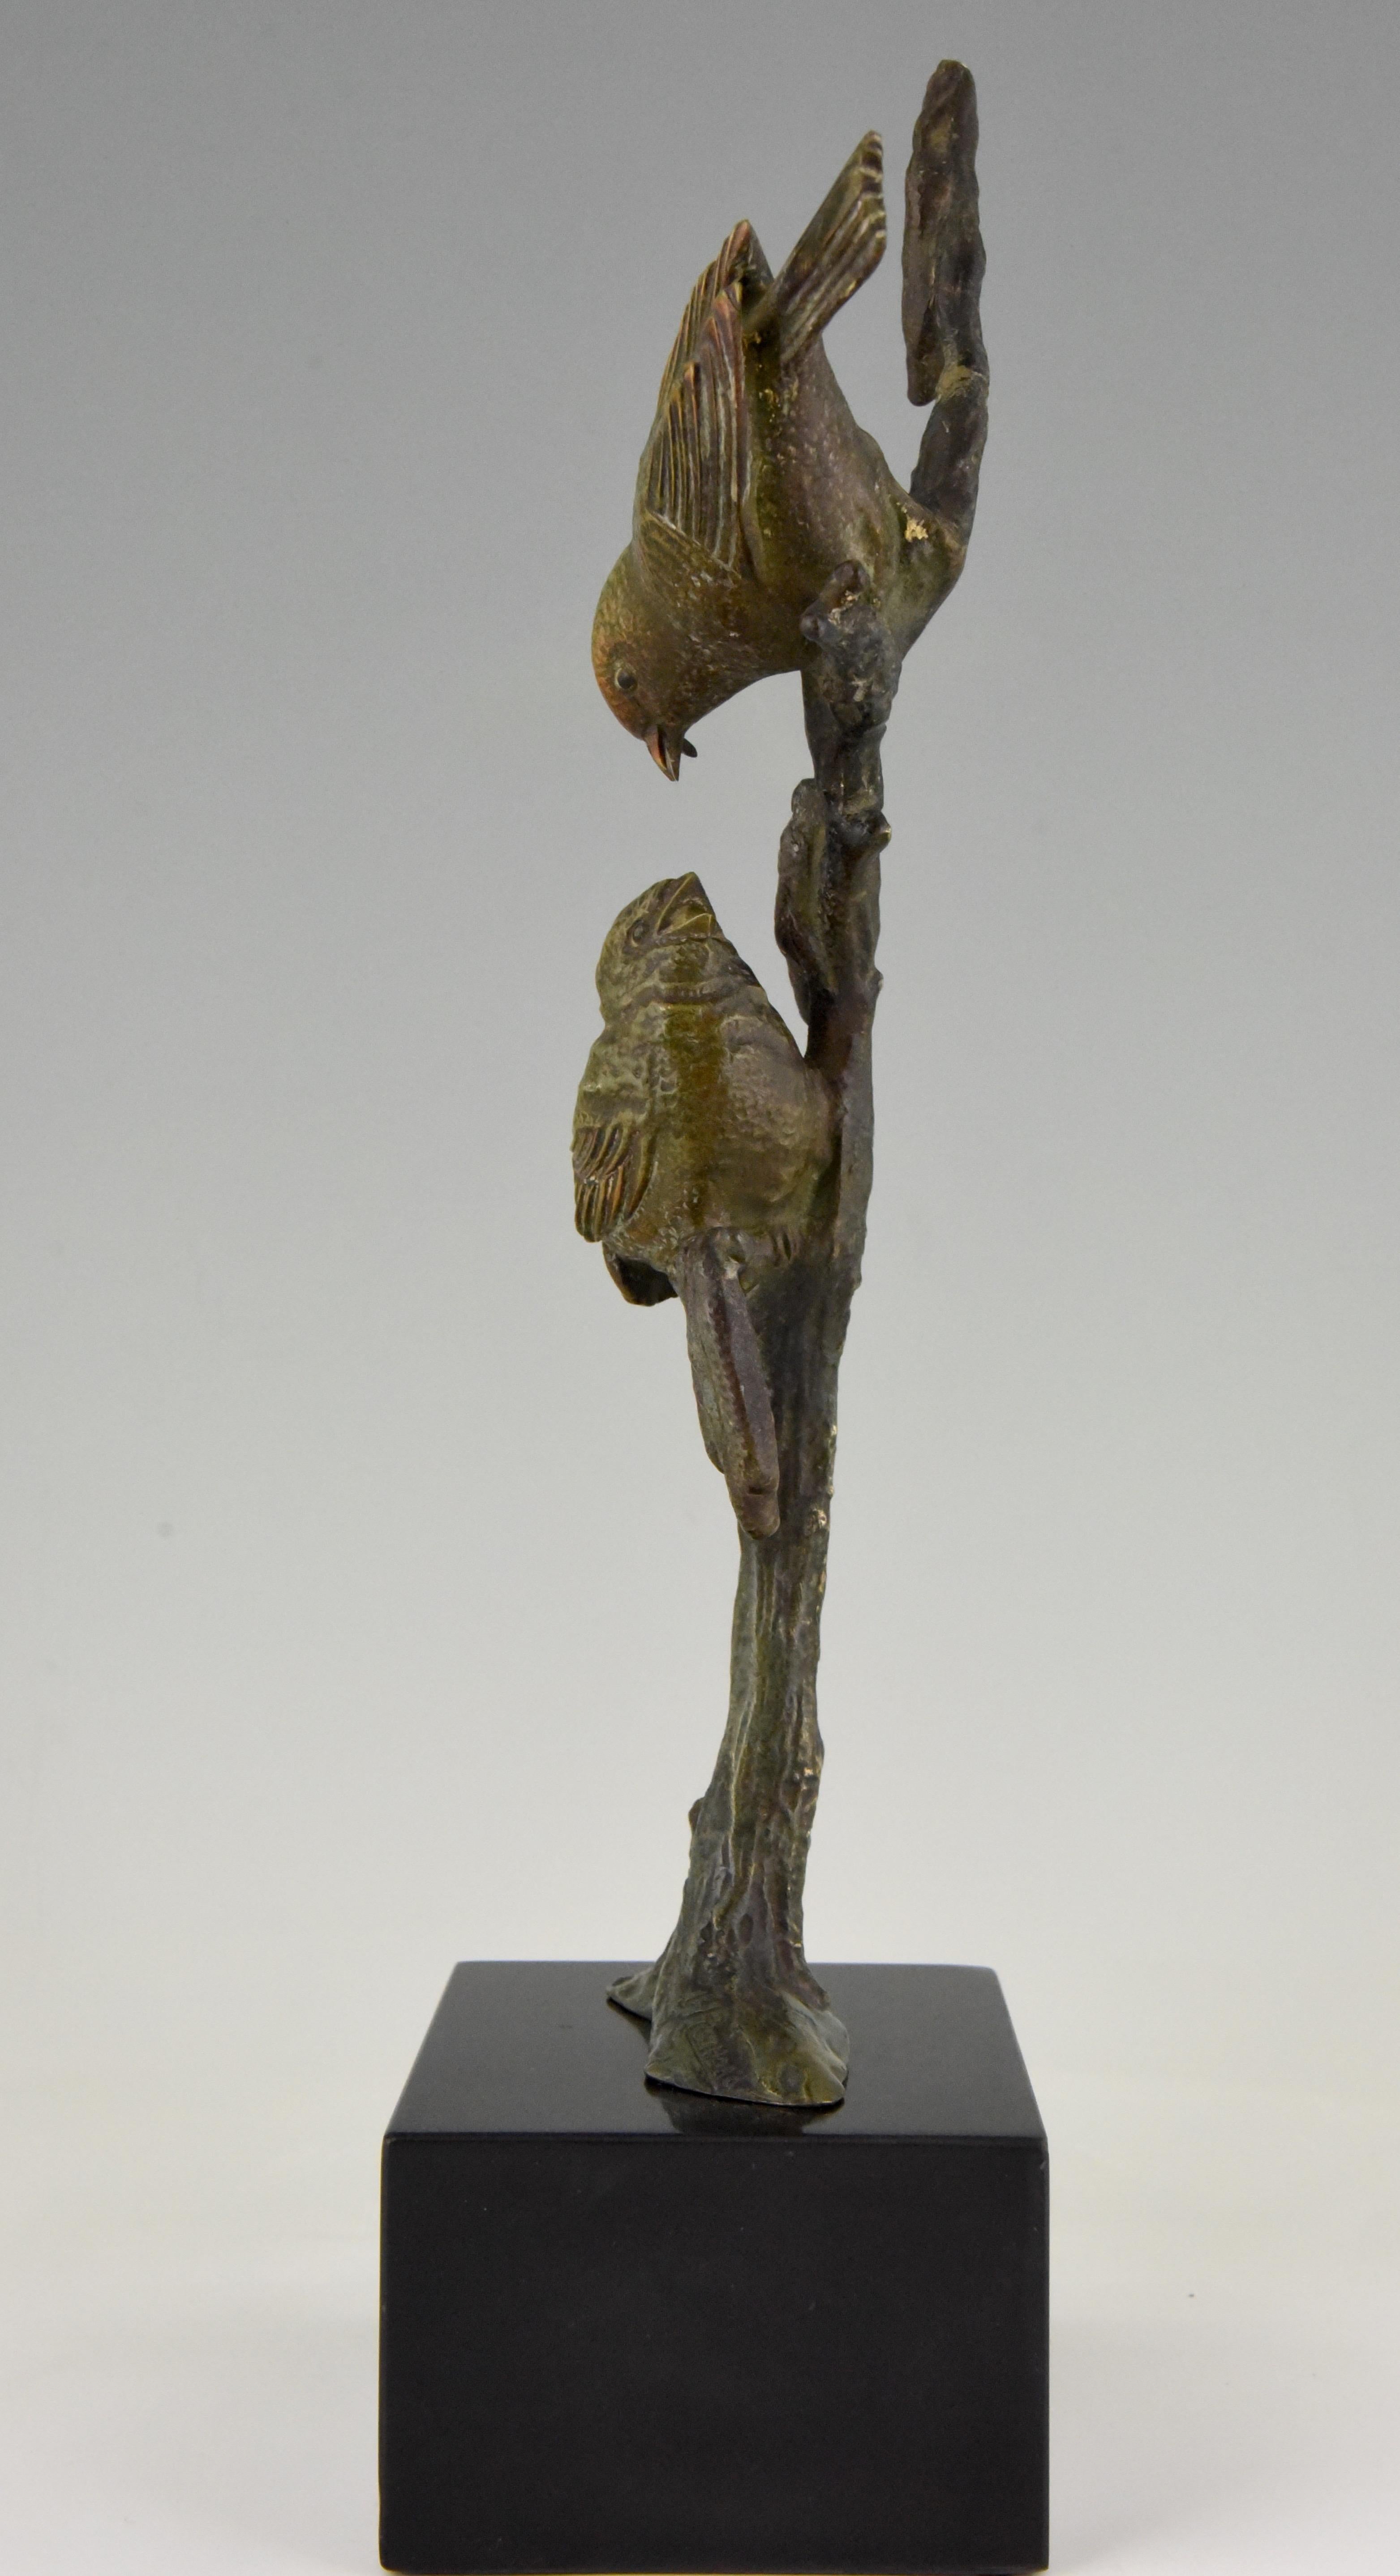 Patinated Art Deco Bronze Sculpture Two Birds on an Branch by Irenee Rochard, 1930